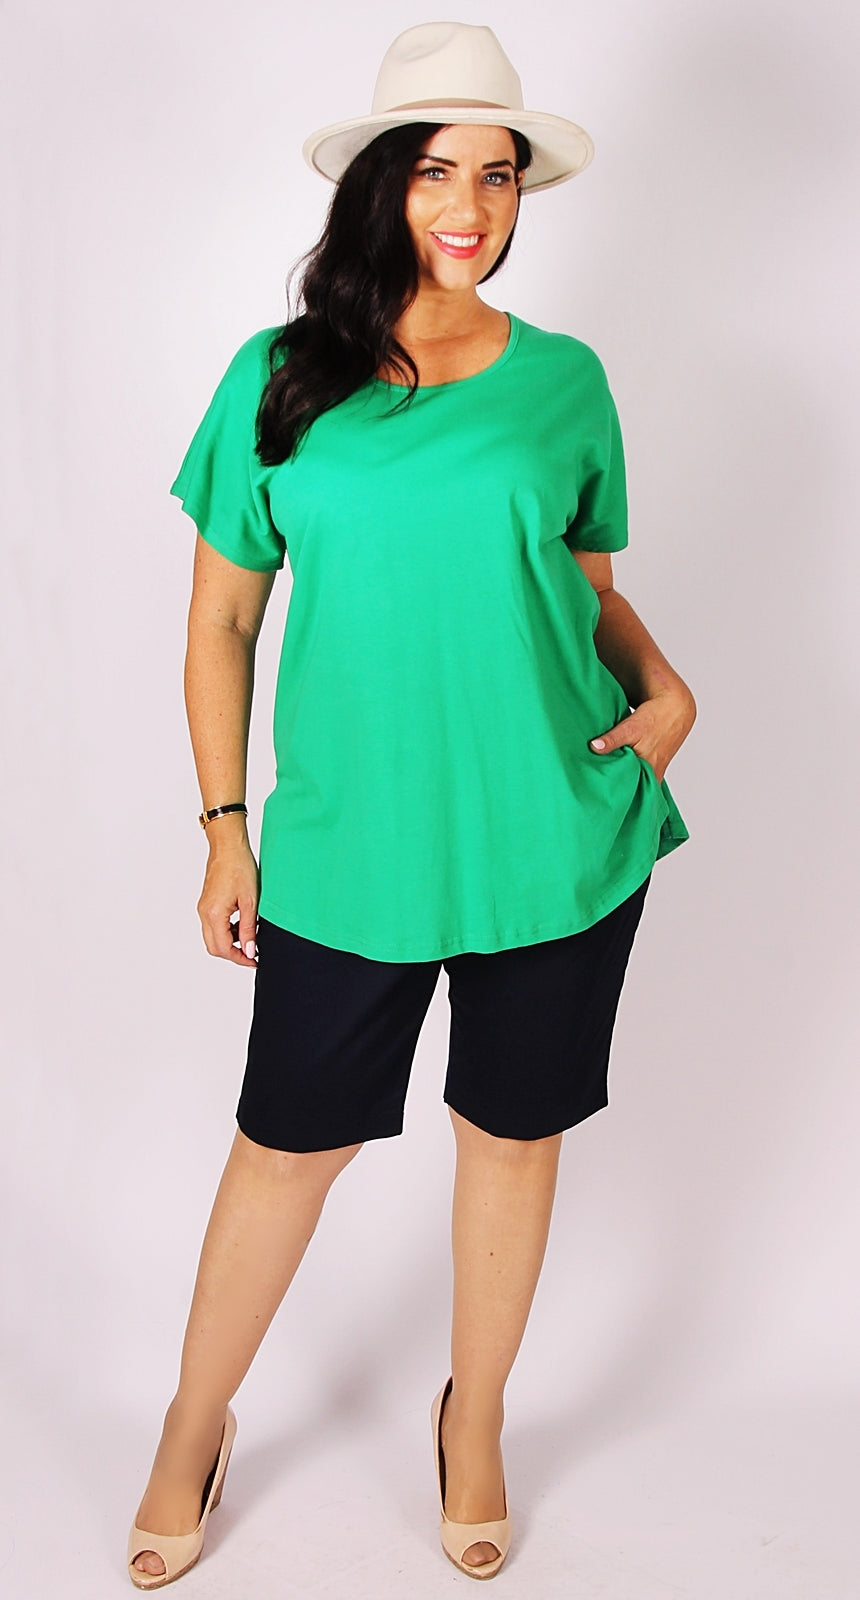 Easy Cotton Shell Top Kelly Green